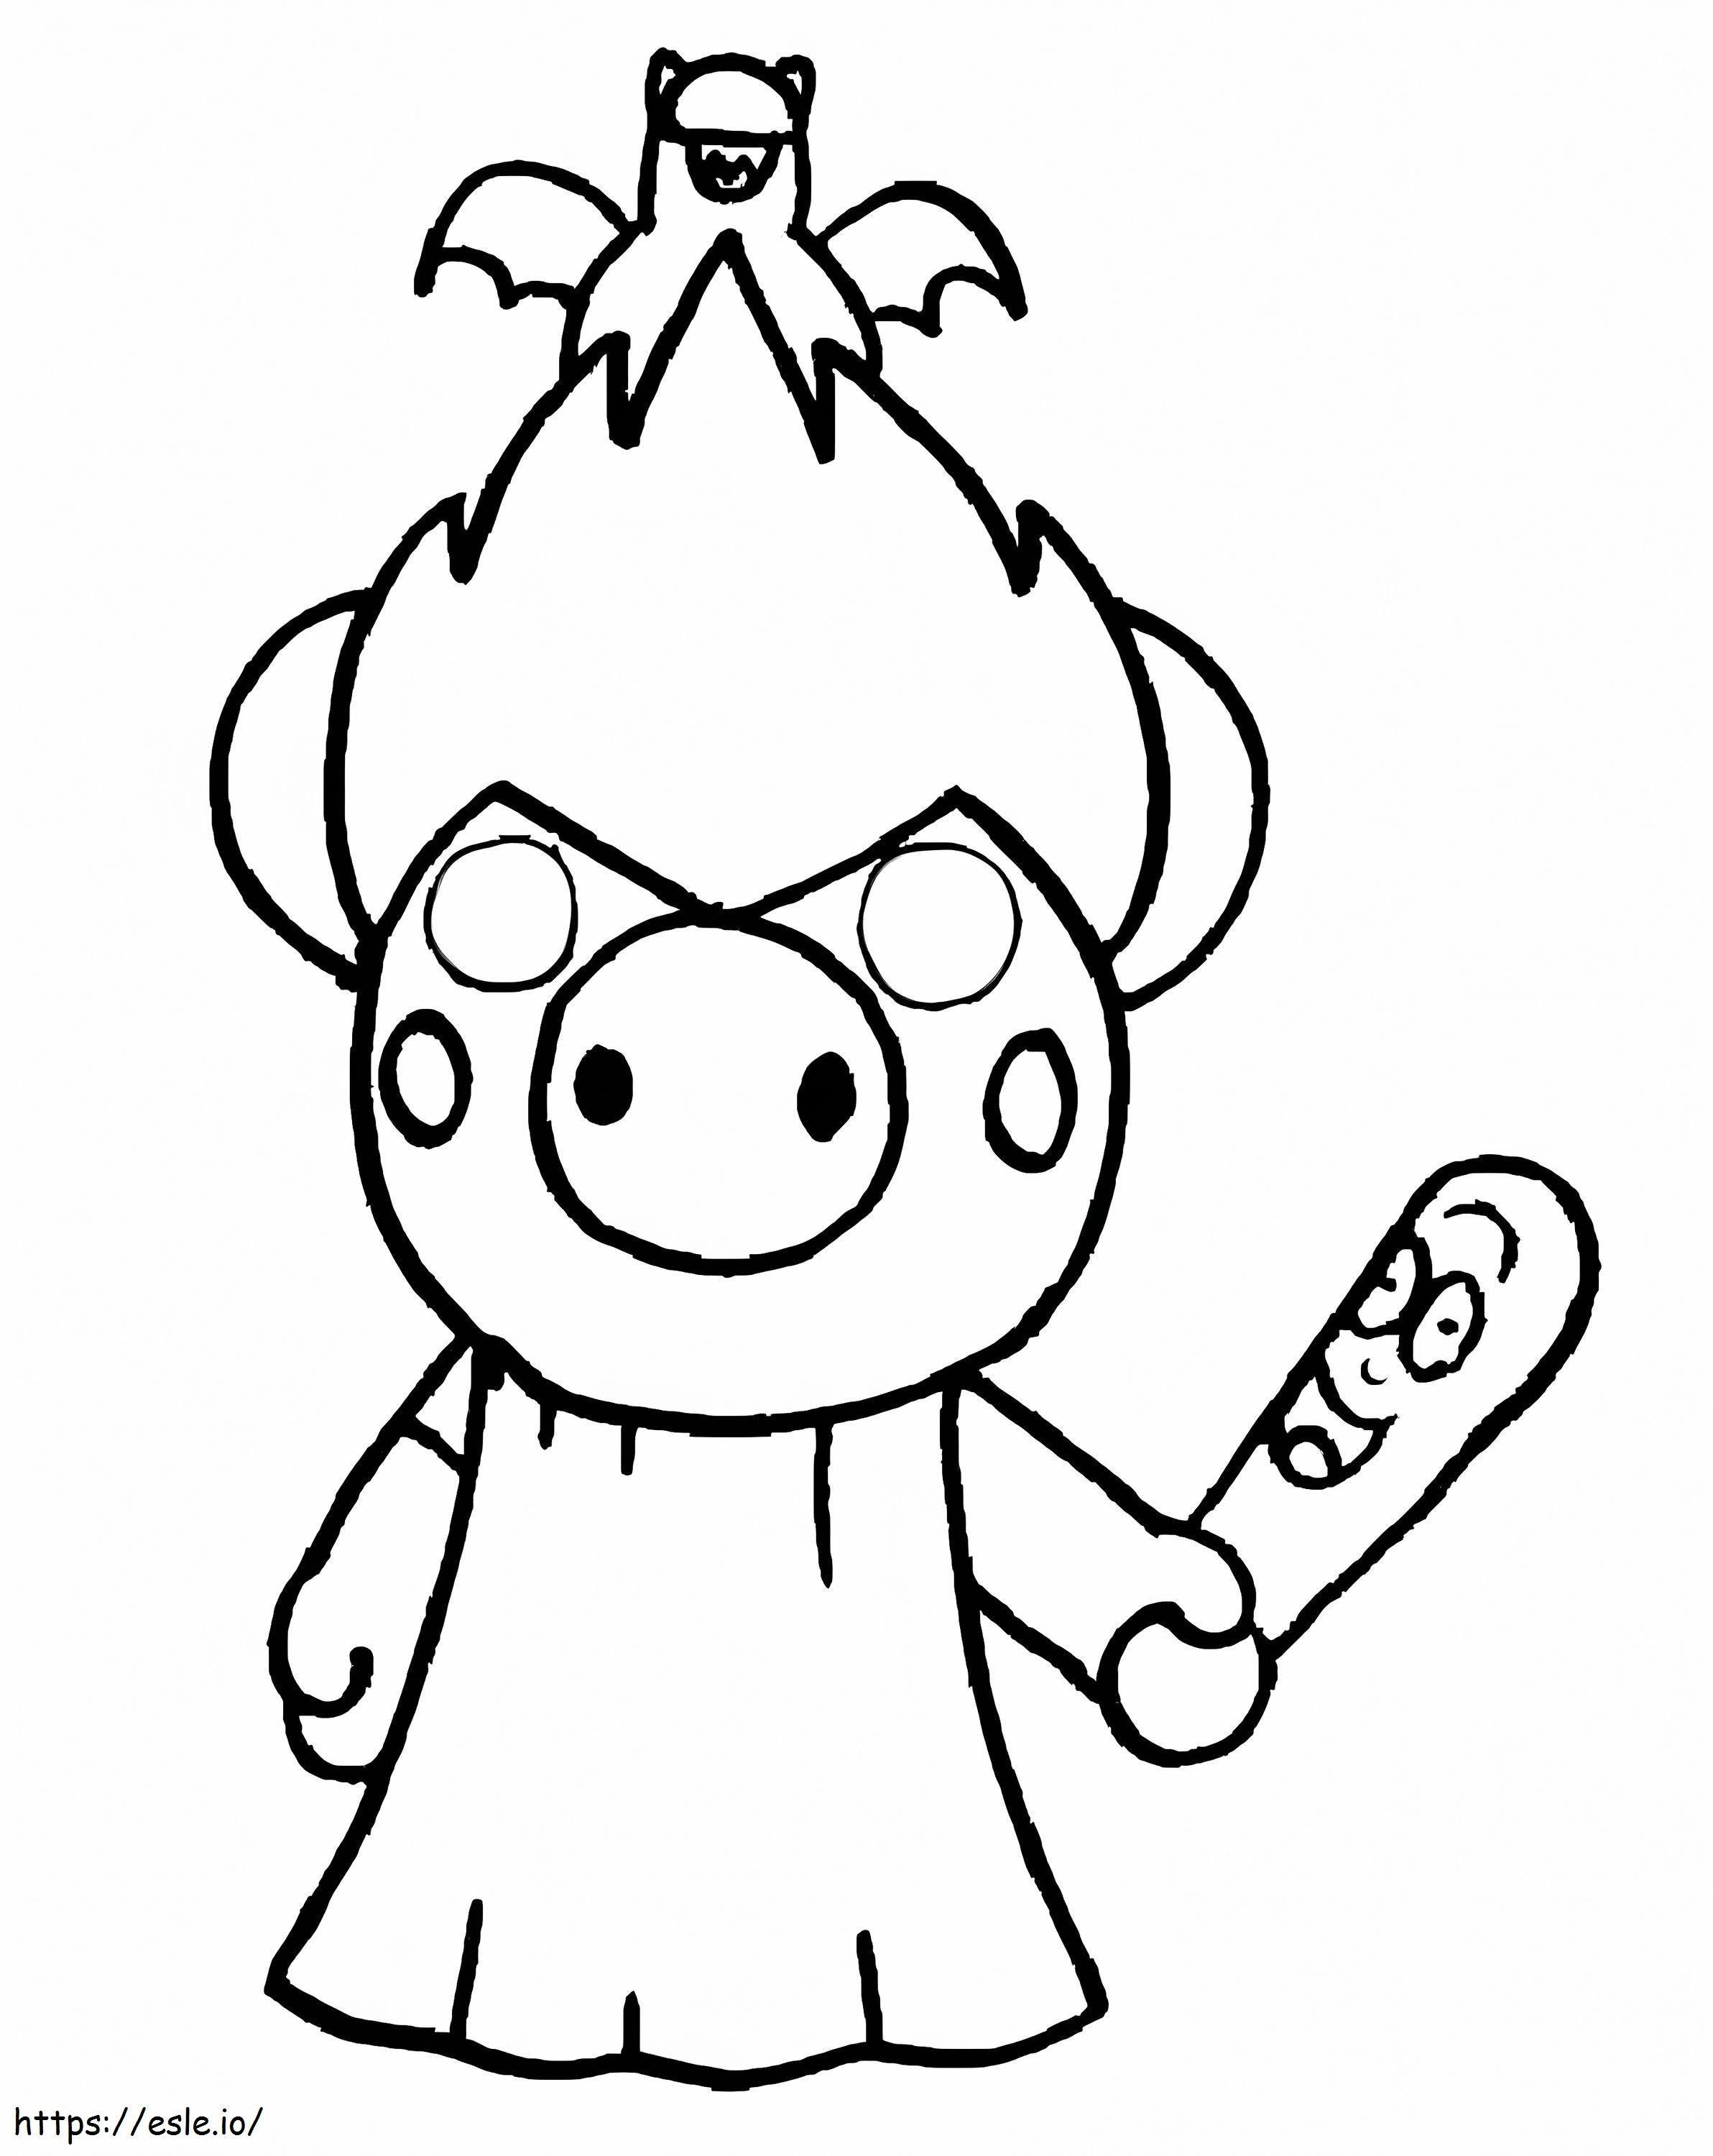 Sketchy Piggy Roblox coloring page